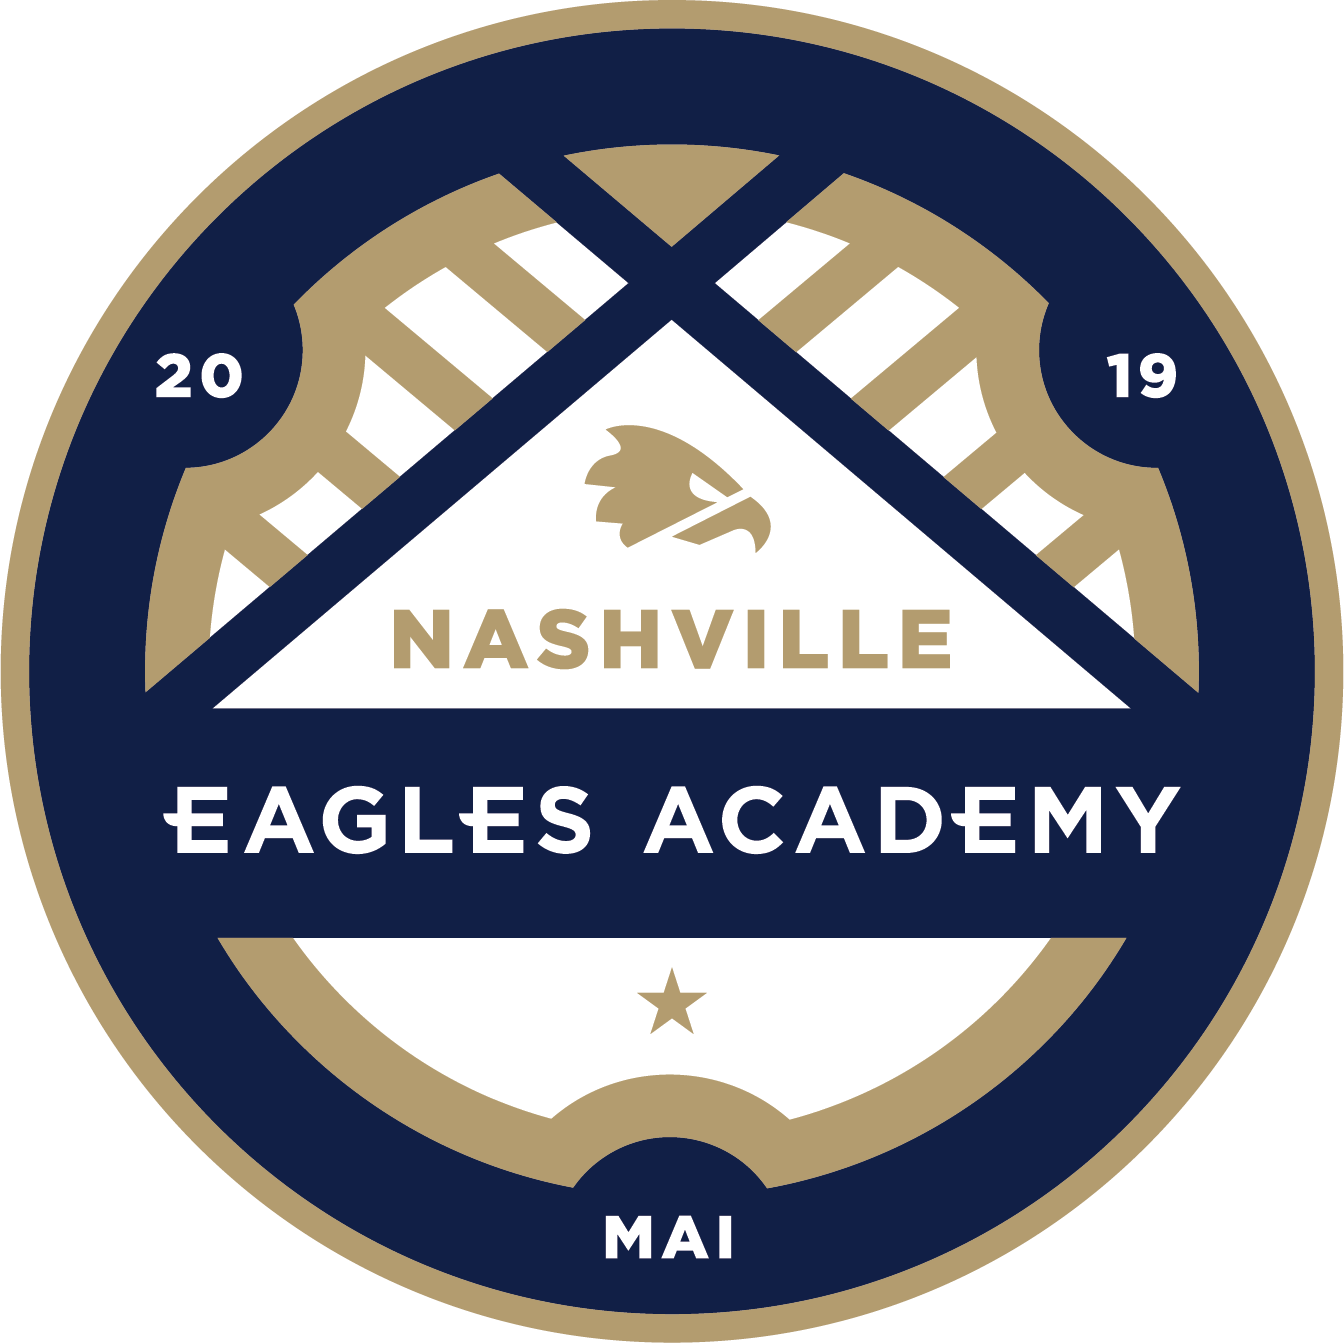 WELCOME TO EAGLES ACADEMY NASHVILLE